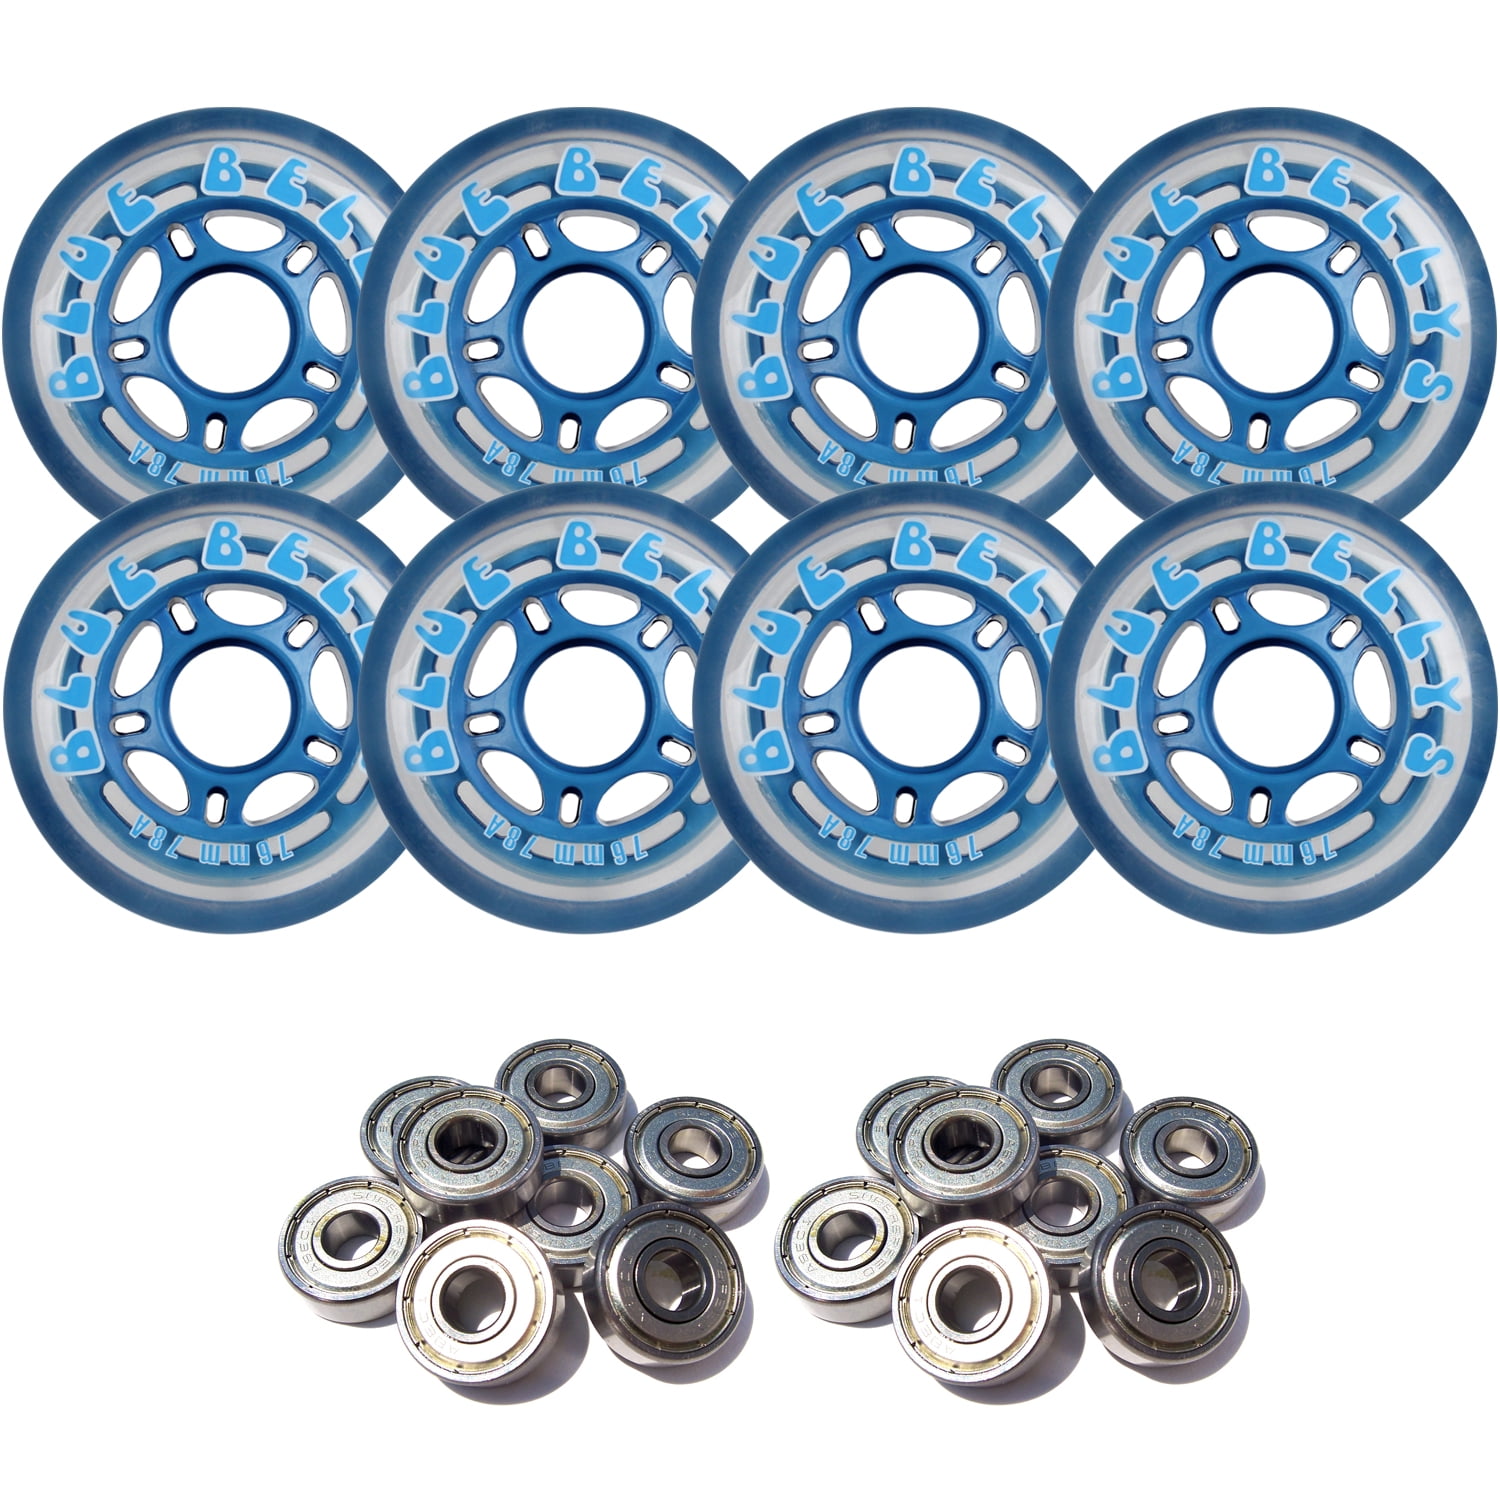 8 Pack Replacement Roller Skating Wheels for Adult Men&Women Skates Replacement Wheel 84mm 80A Inline Skate Wheels 